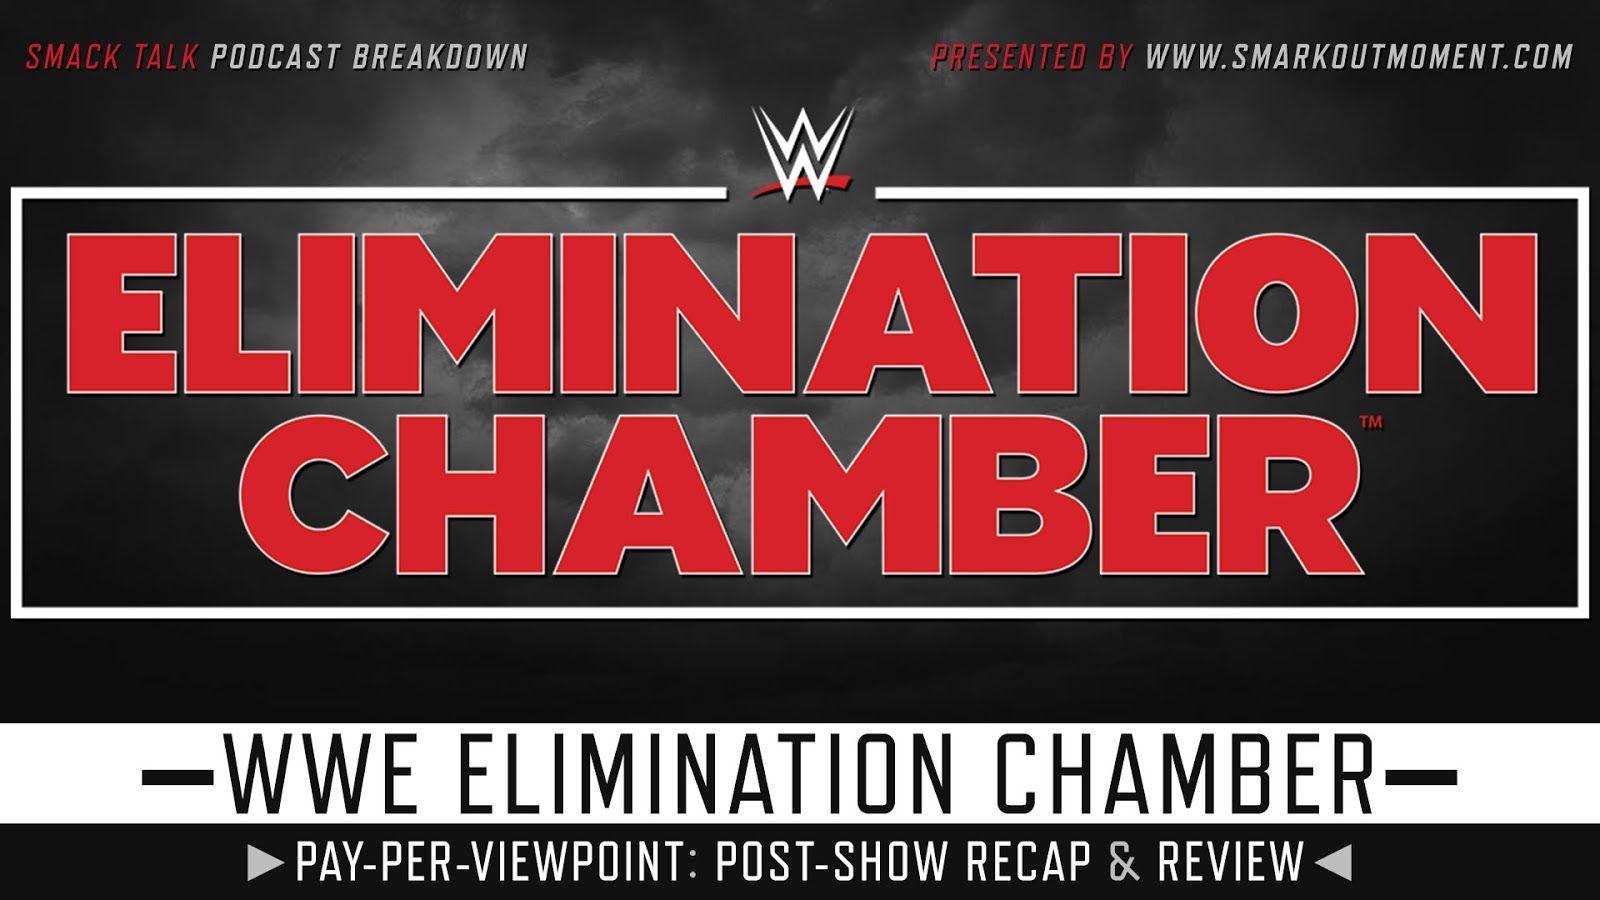 WWE ELIMINATION CHAMBER 2019 Recap & Review Pay Per Viewpoint Post